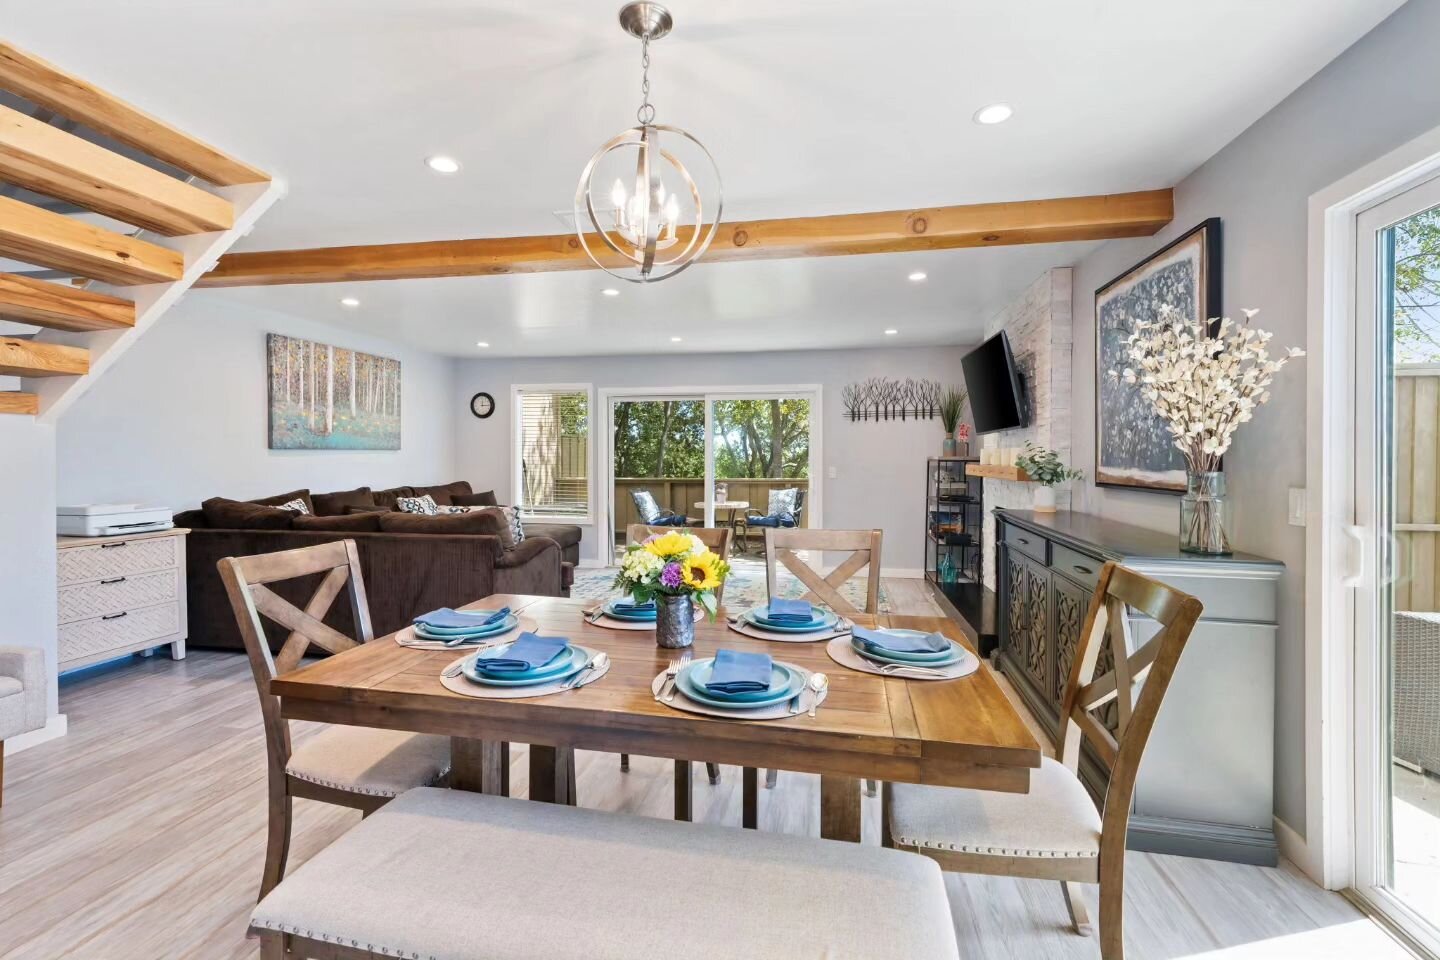 Comfortable &amp; convenient living experience in Marin County 💫

📍4D Oak Crest Dr. Novato, CA 94947

This charming two-level end unit has been updated, includes two outdoor patios, an open-plan living area perfect for entertaining with a cozy fire